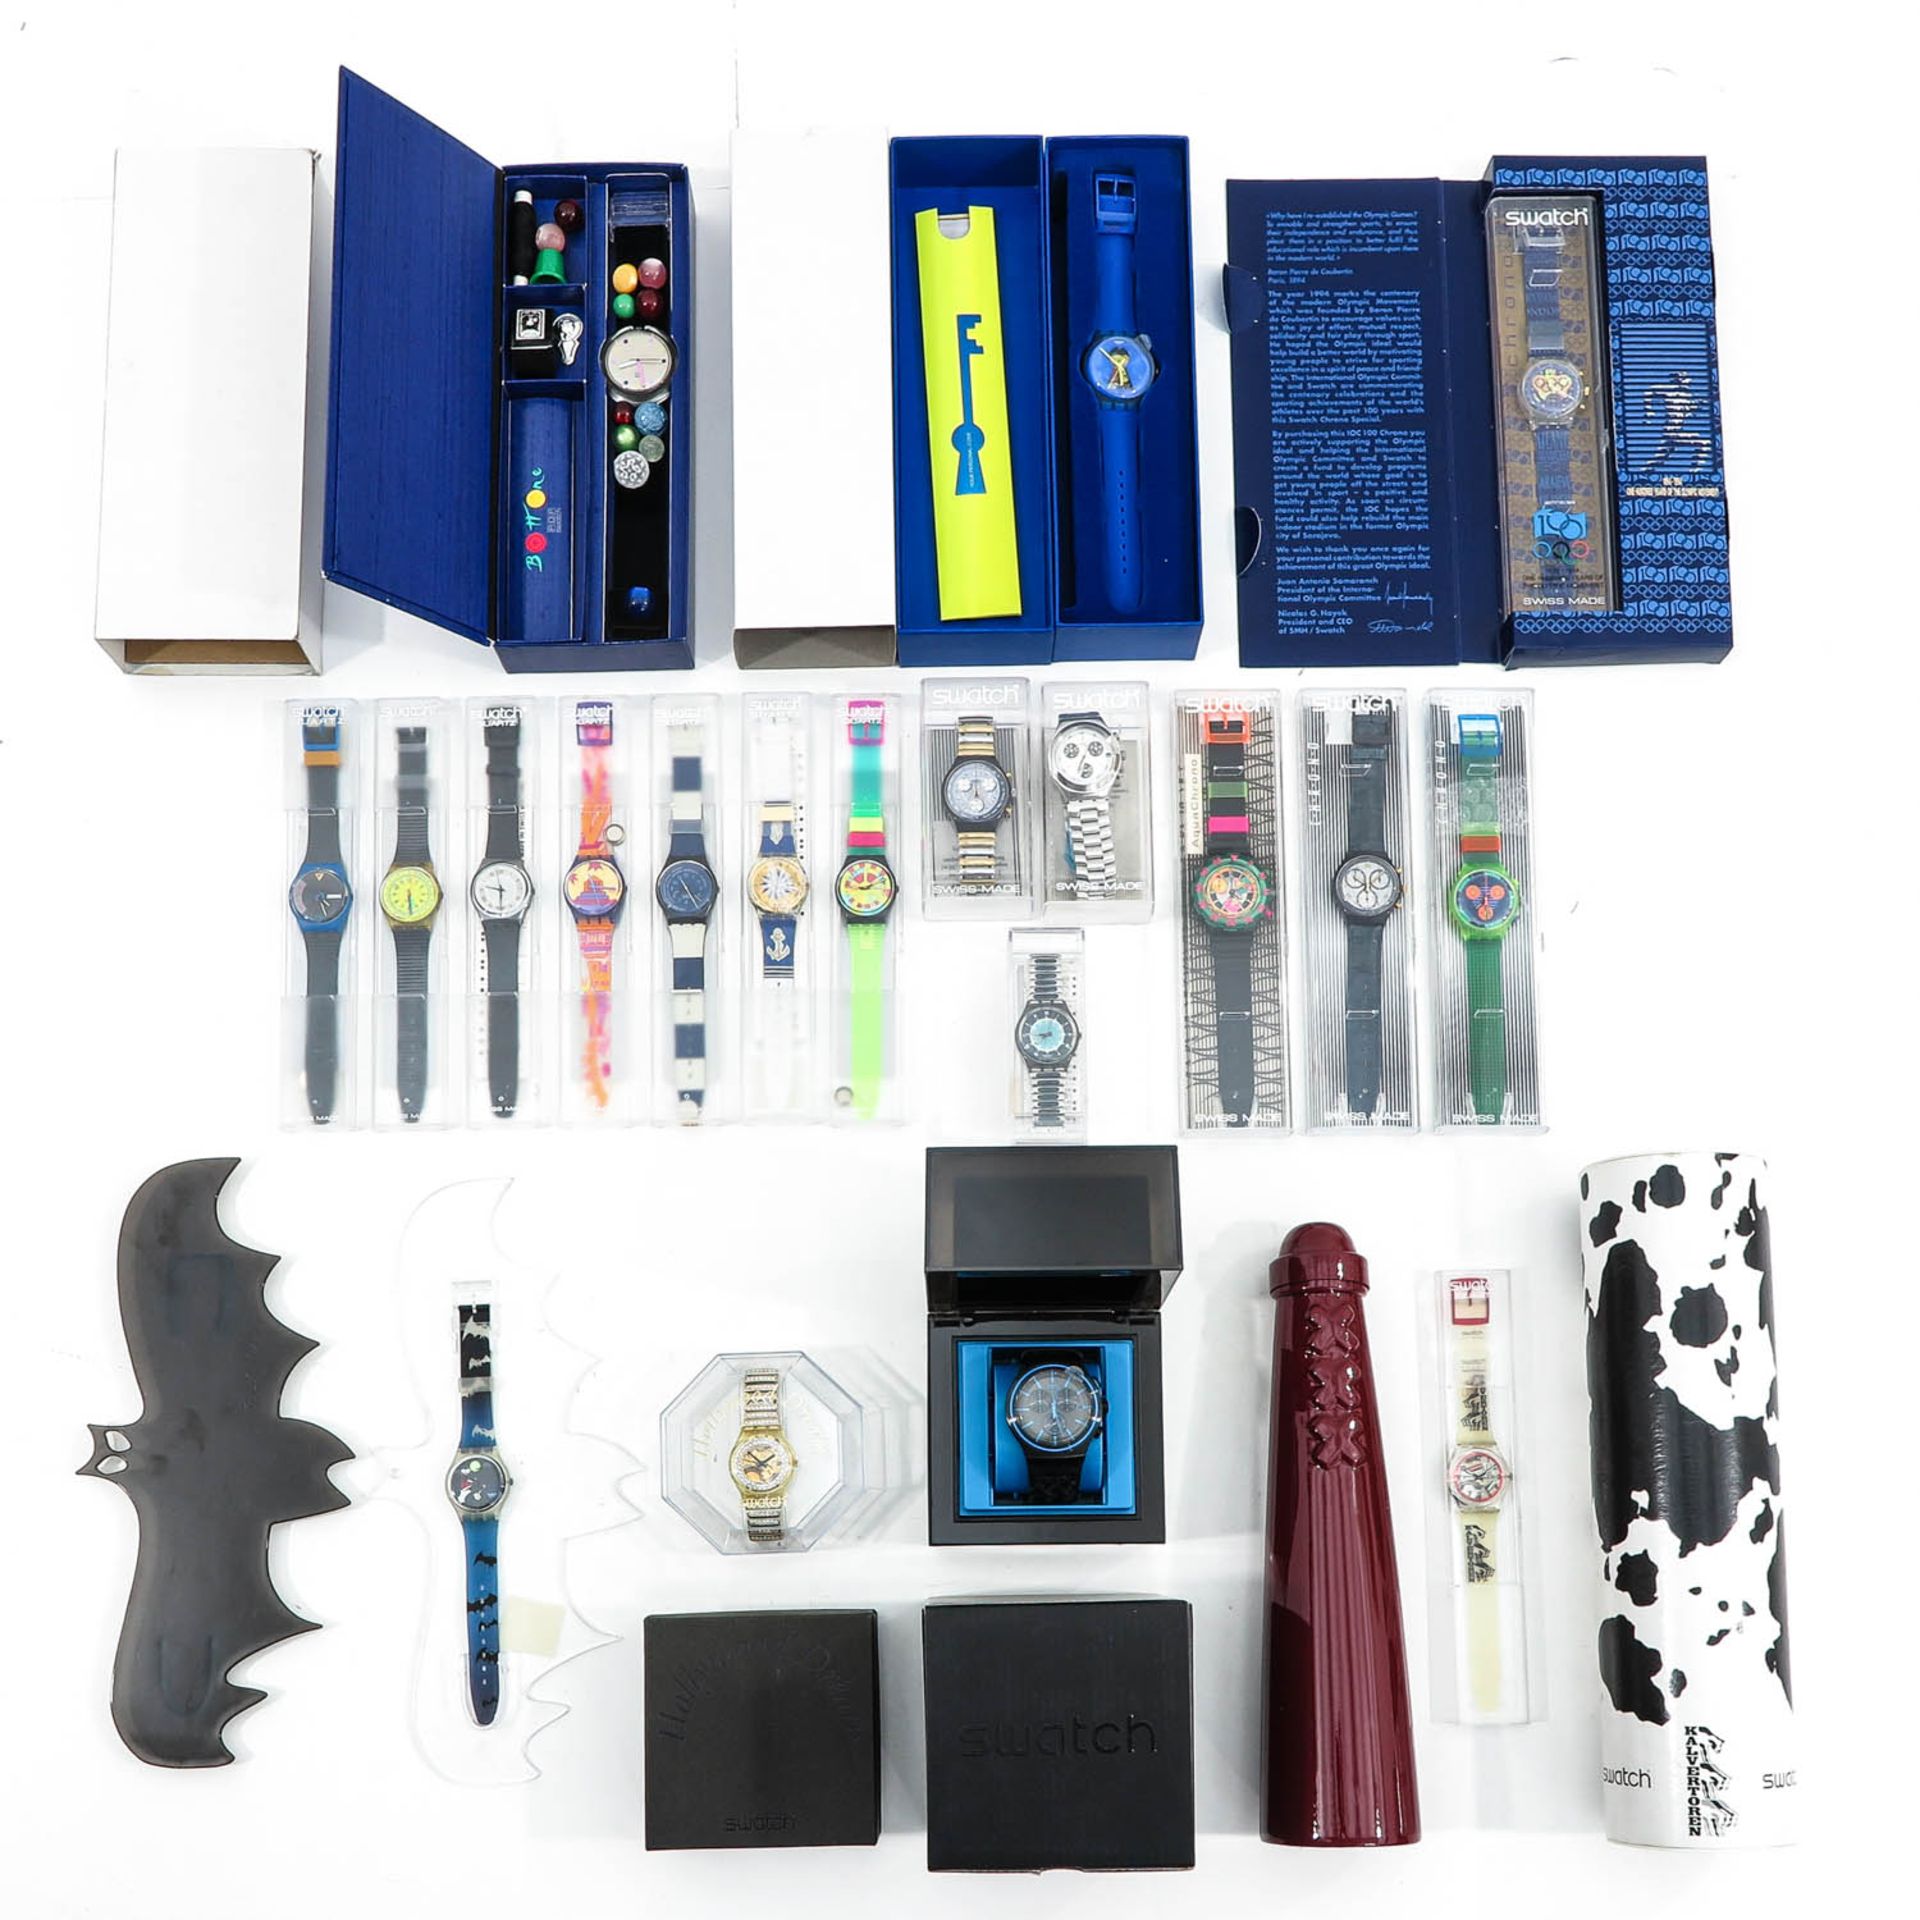 A Collection of 20 Swatch Watches